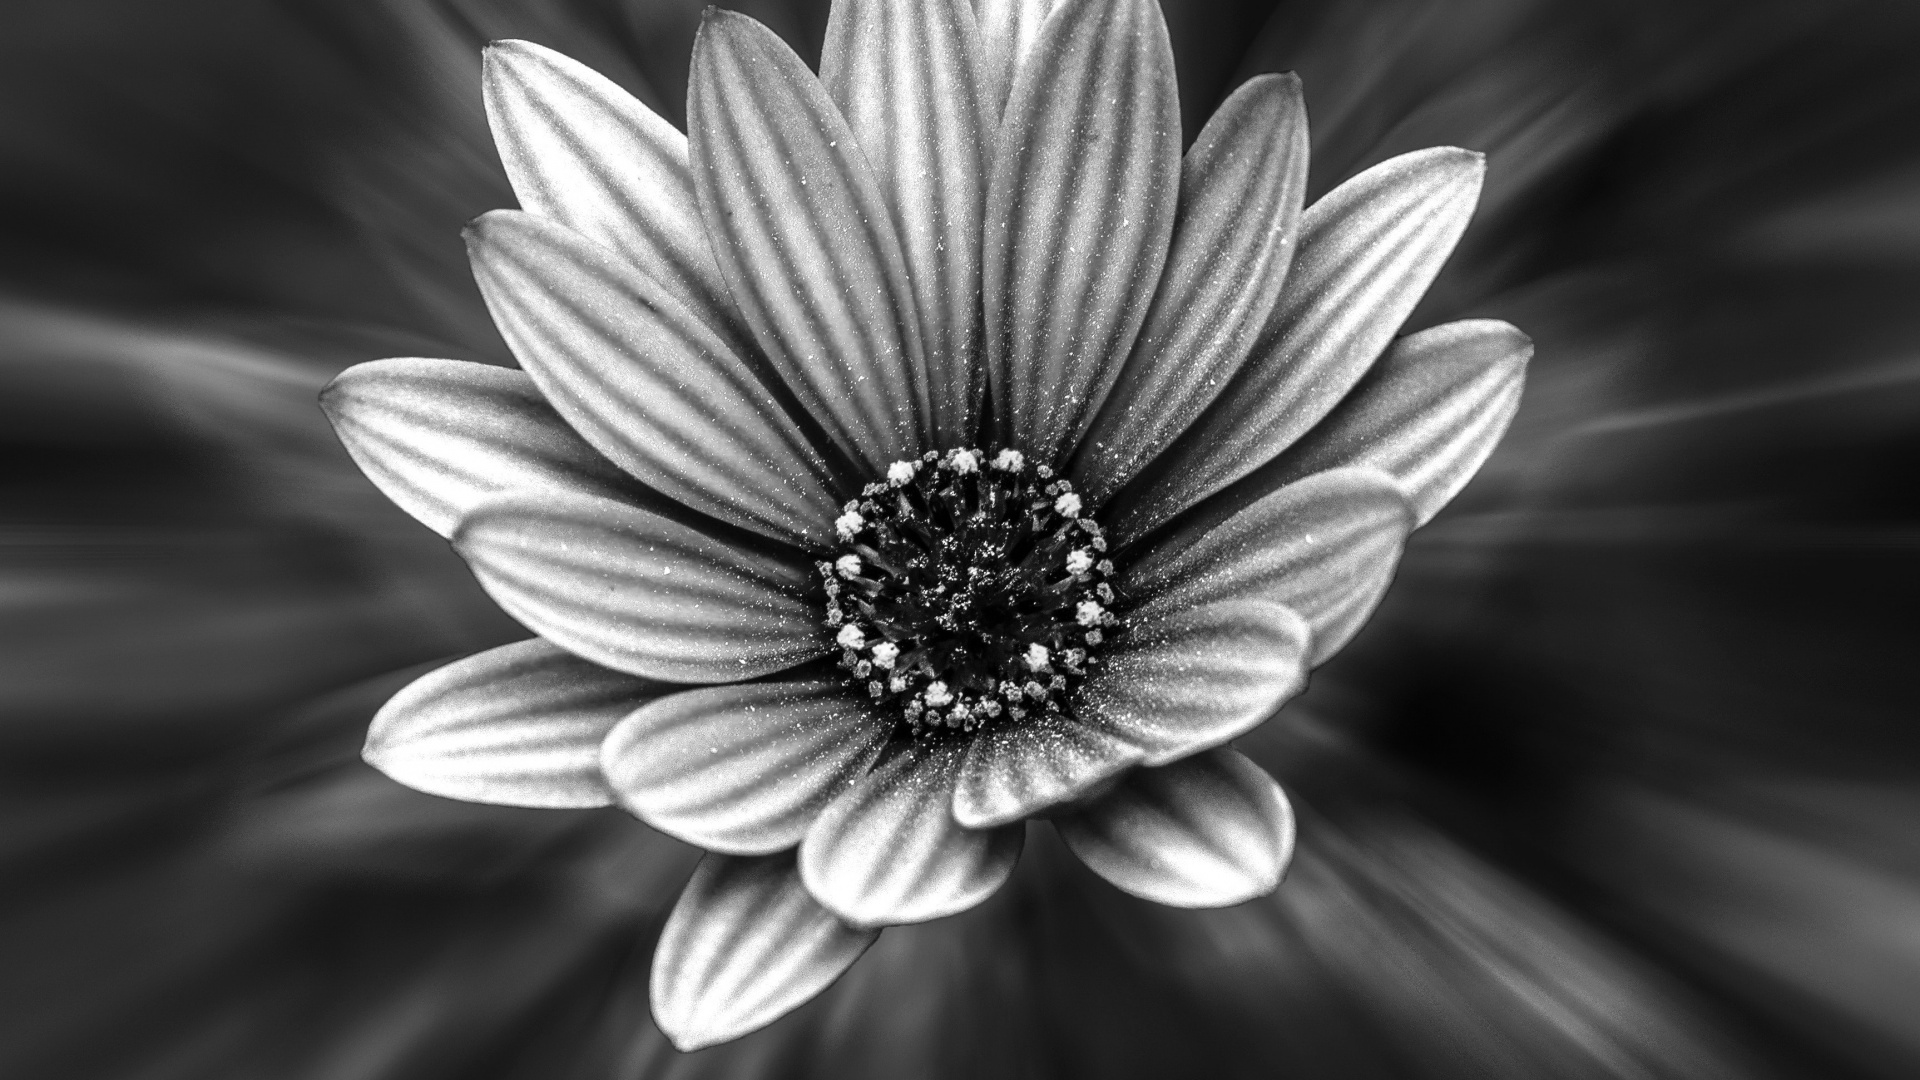 Grayscale Photo of a Flower. Wallpaper in 1920x1080 Resolution